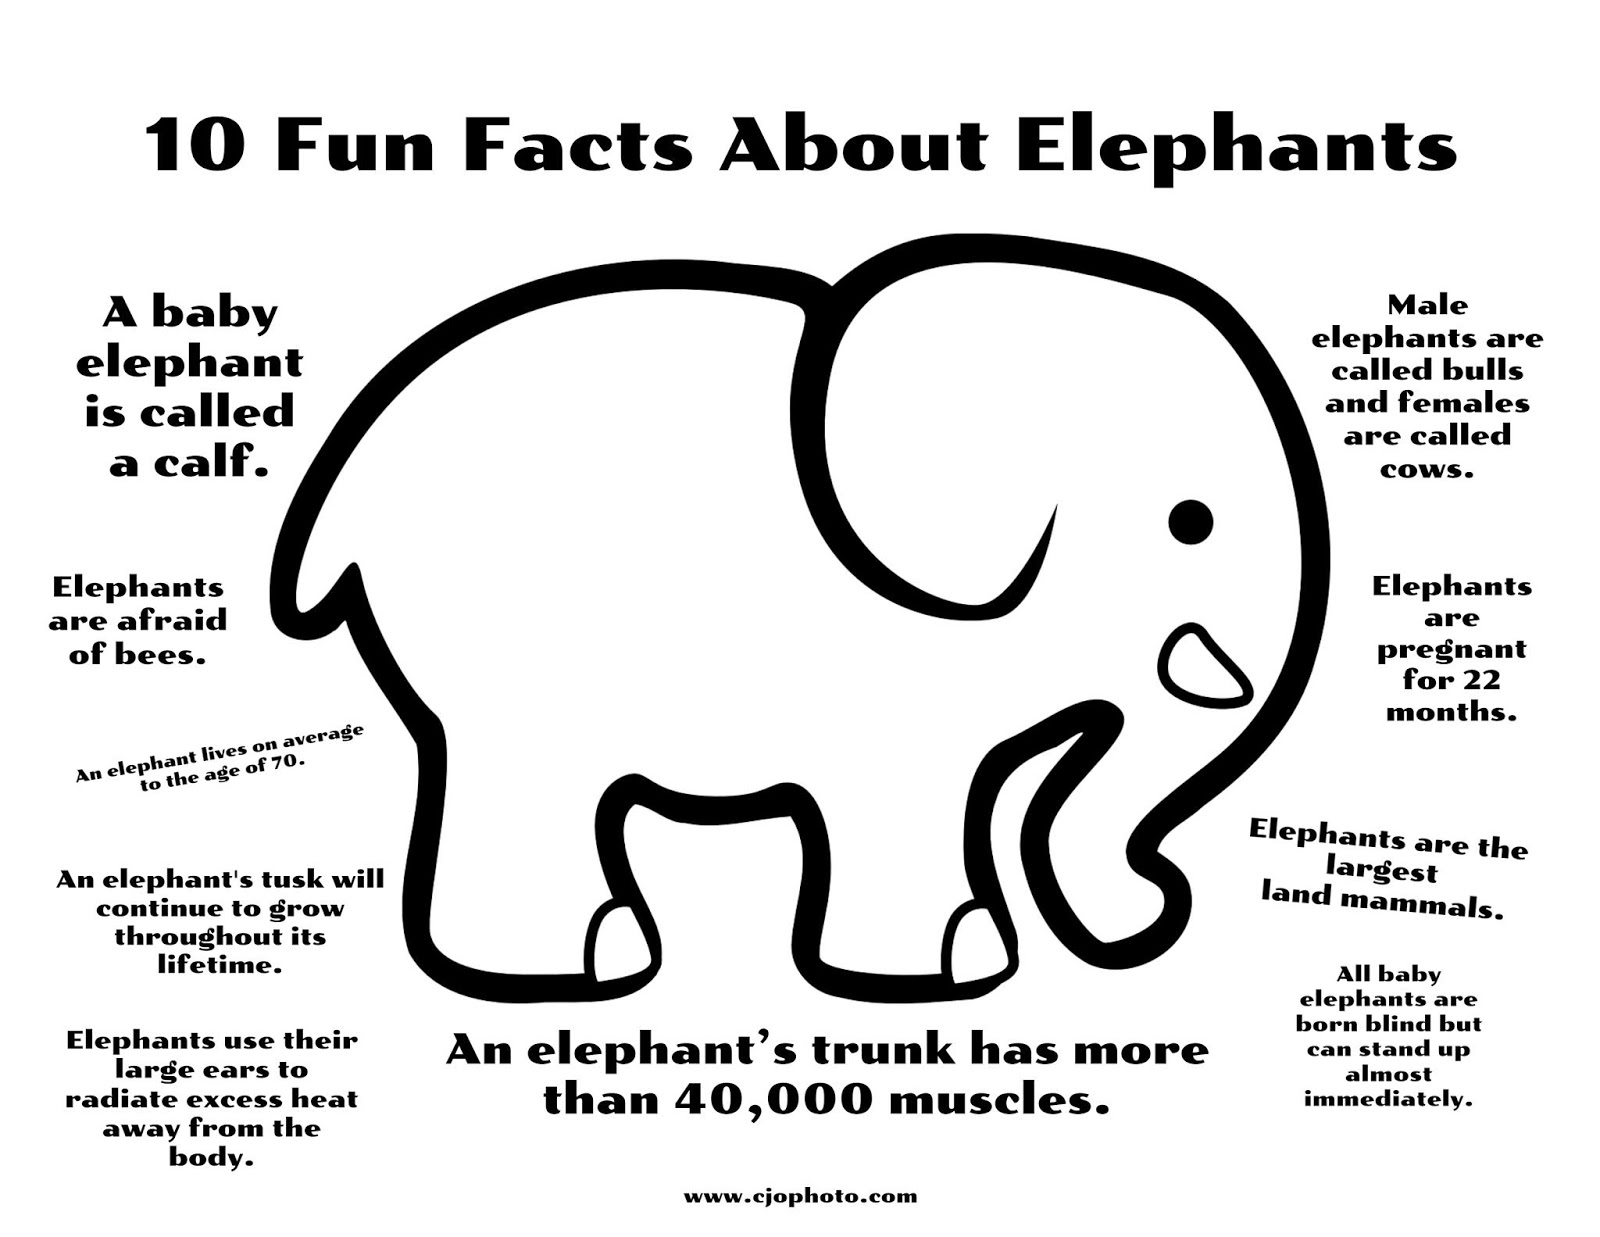 cjo-photo-fun-facts-coloring-page-elephants